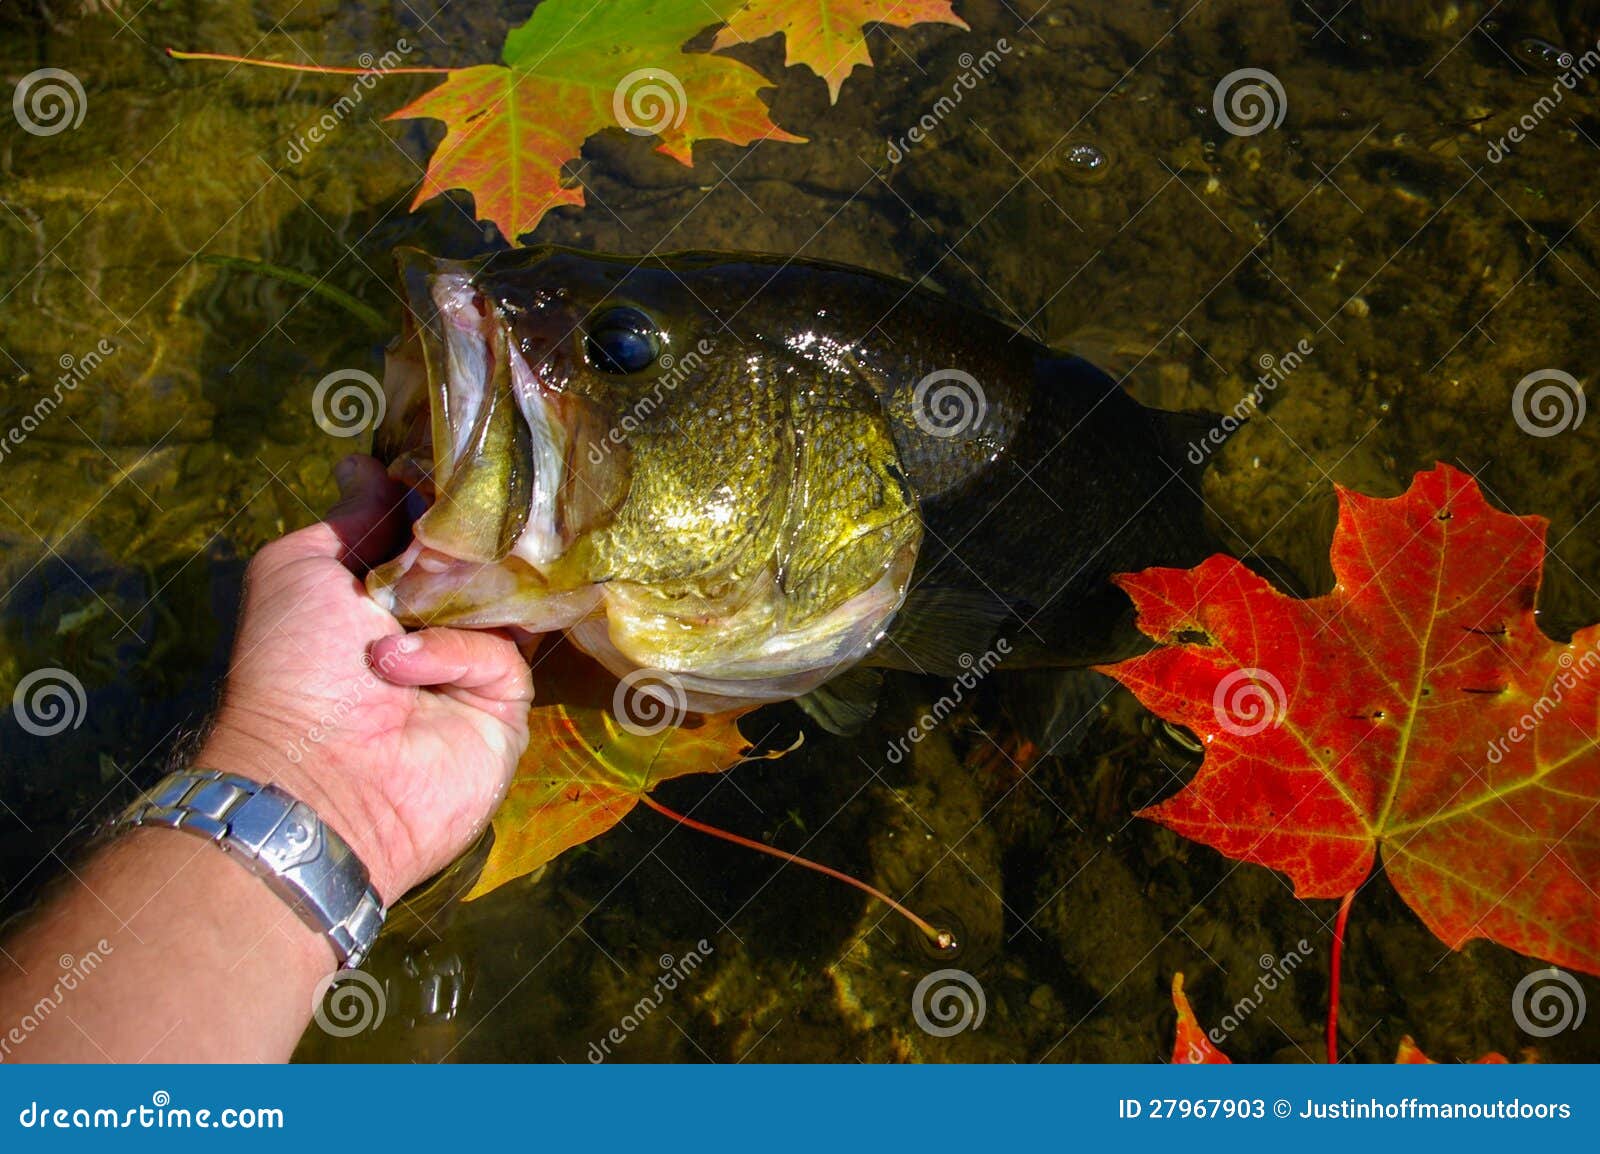 large mouth bass lipped by angler fishing